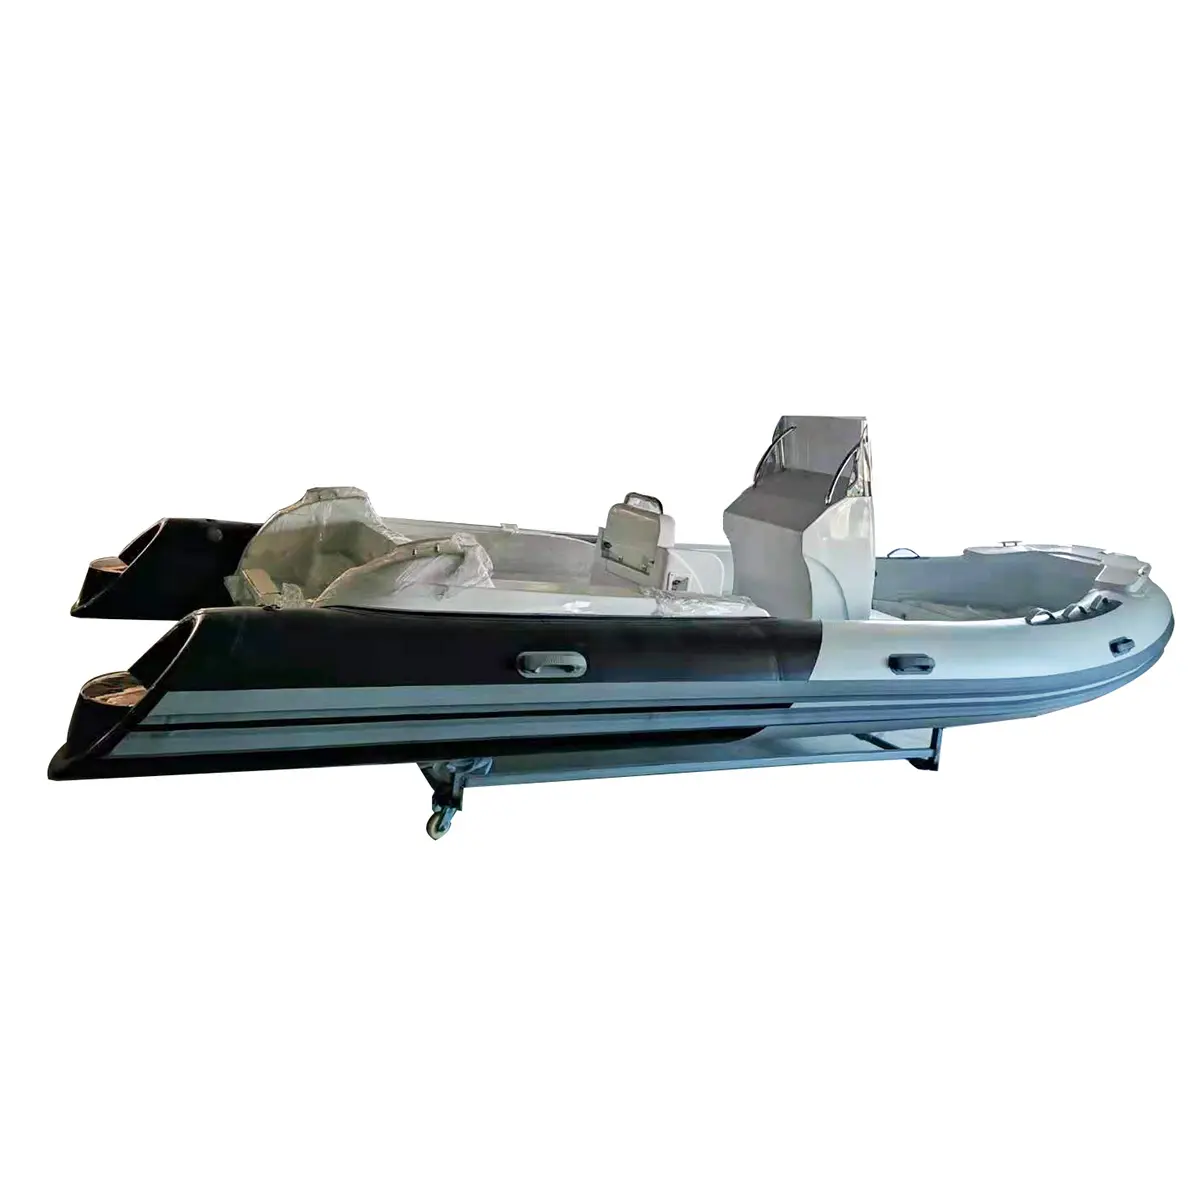 Liya 6.2meter rib boat with canopy fibre glass dinghies for passengers